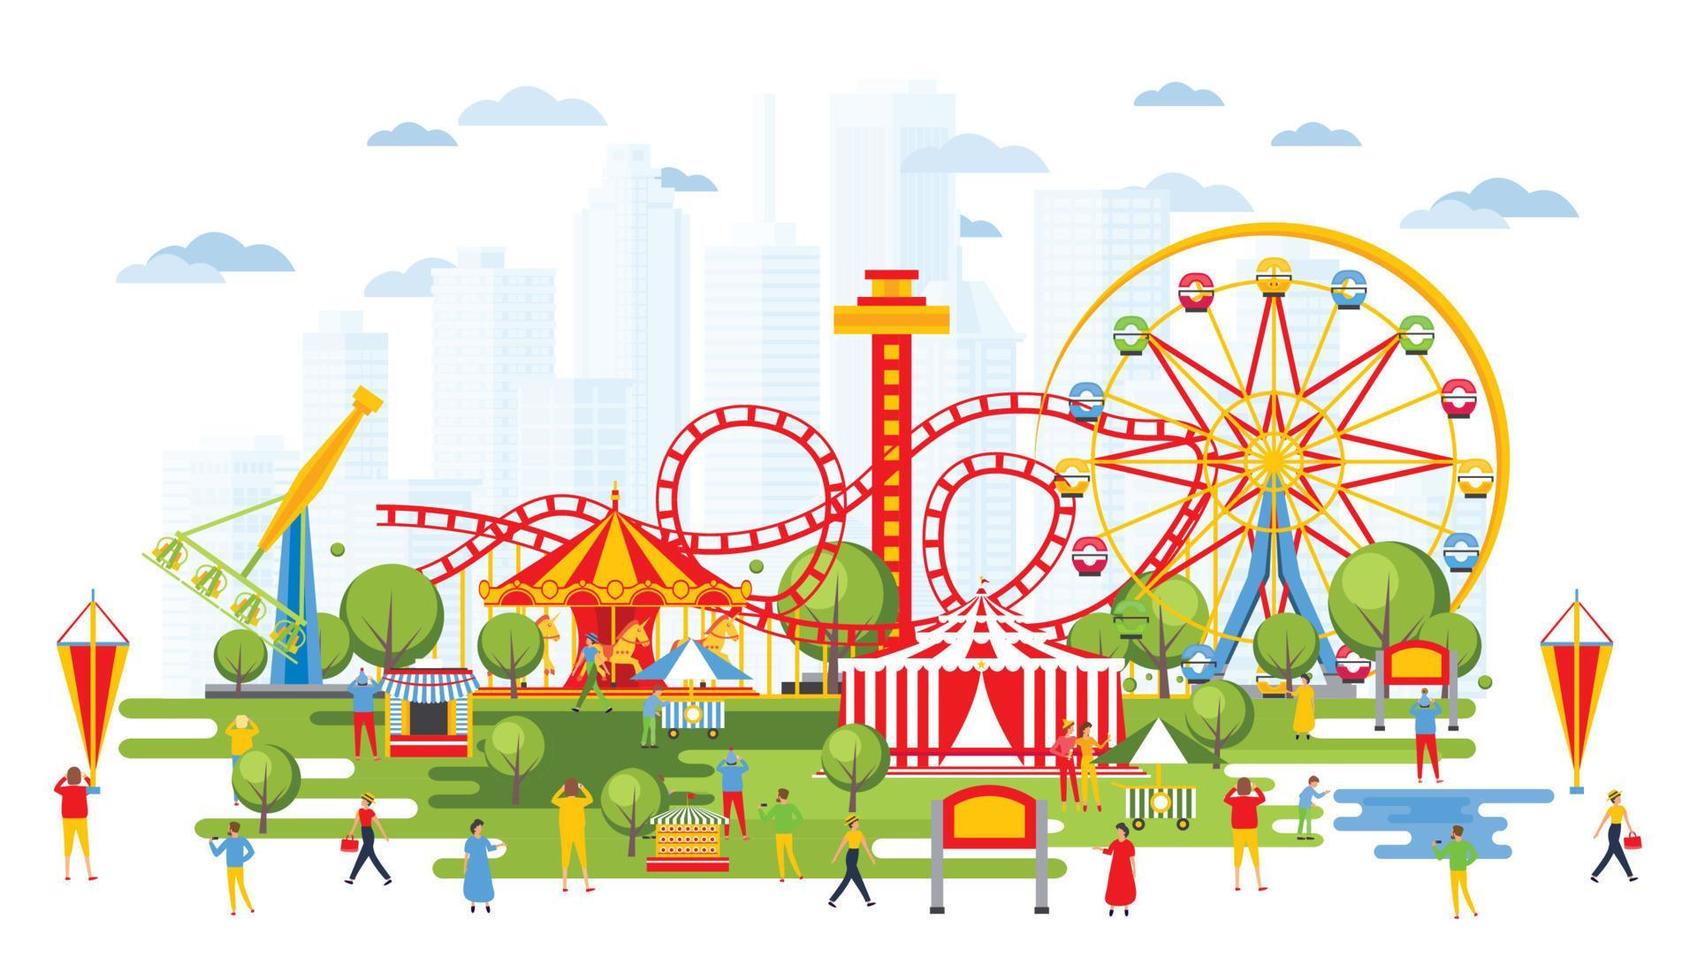 Amusement Park with Carousels in Cartoon Style. Urban Cityscape. vector